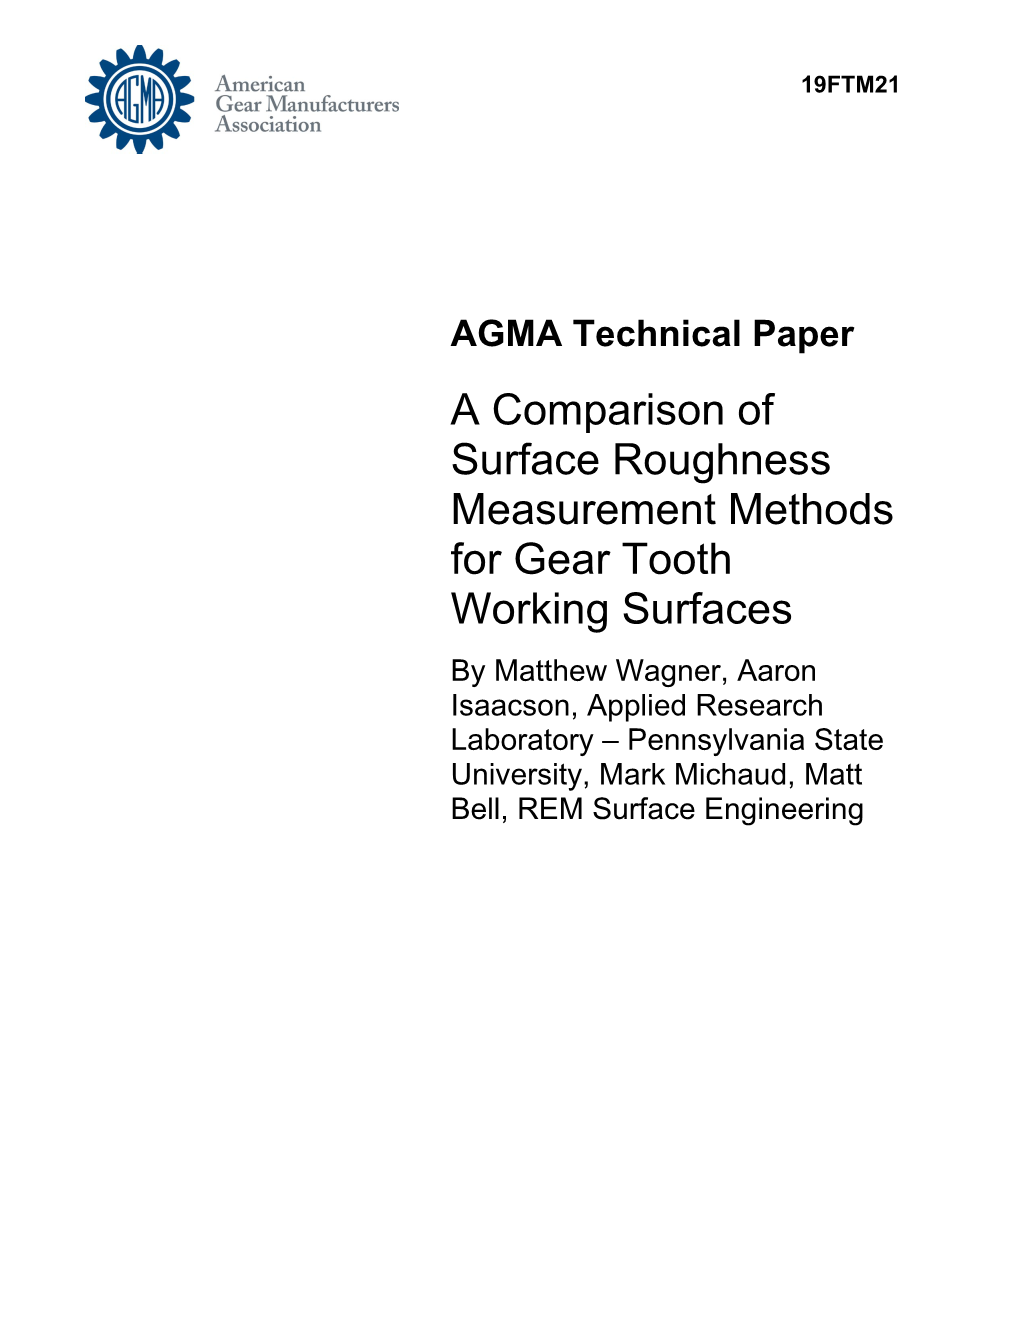 A Comparison of Surface Roughness Measurement Methods for Gear